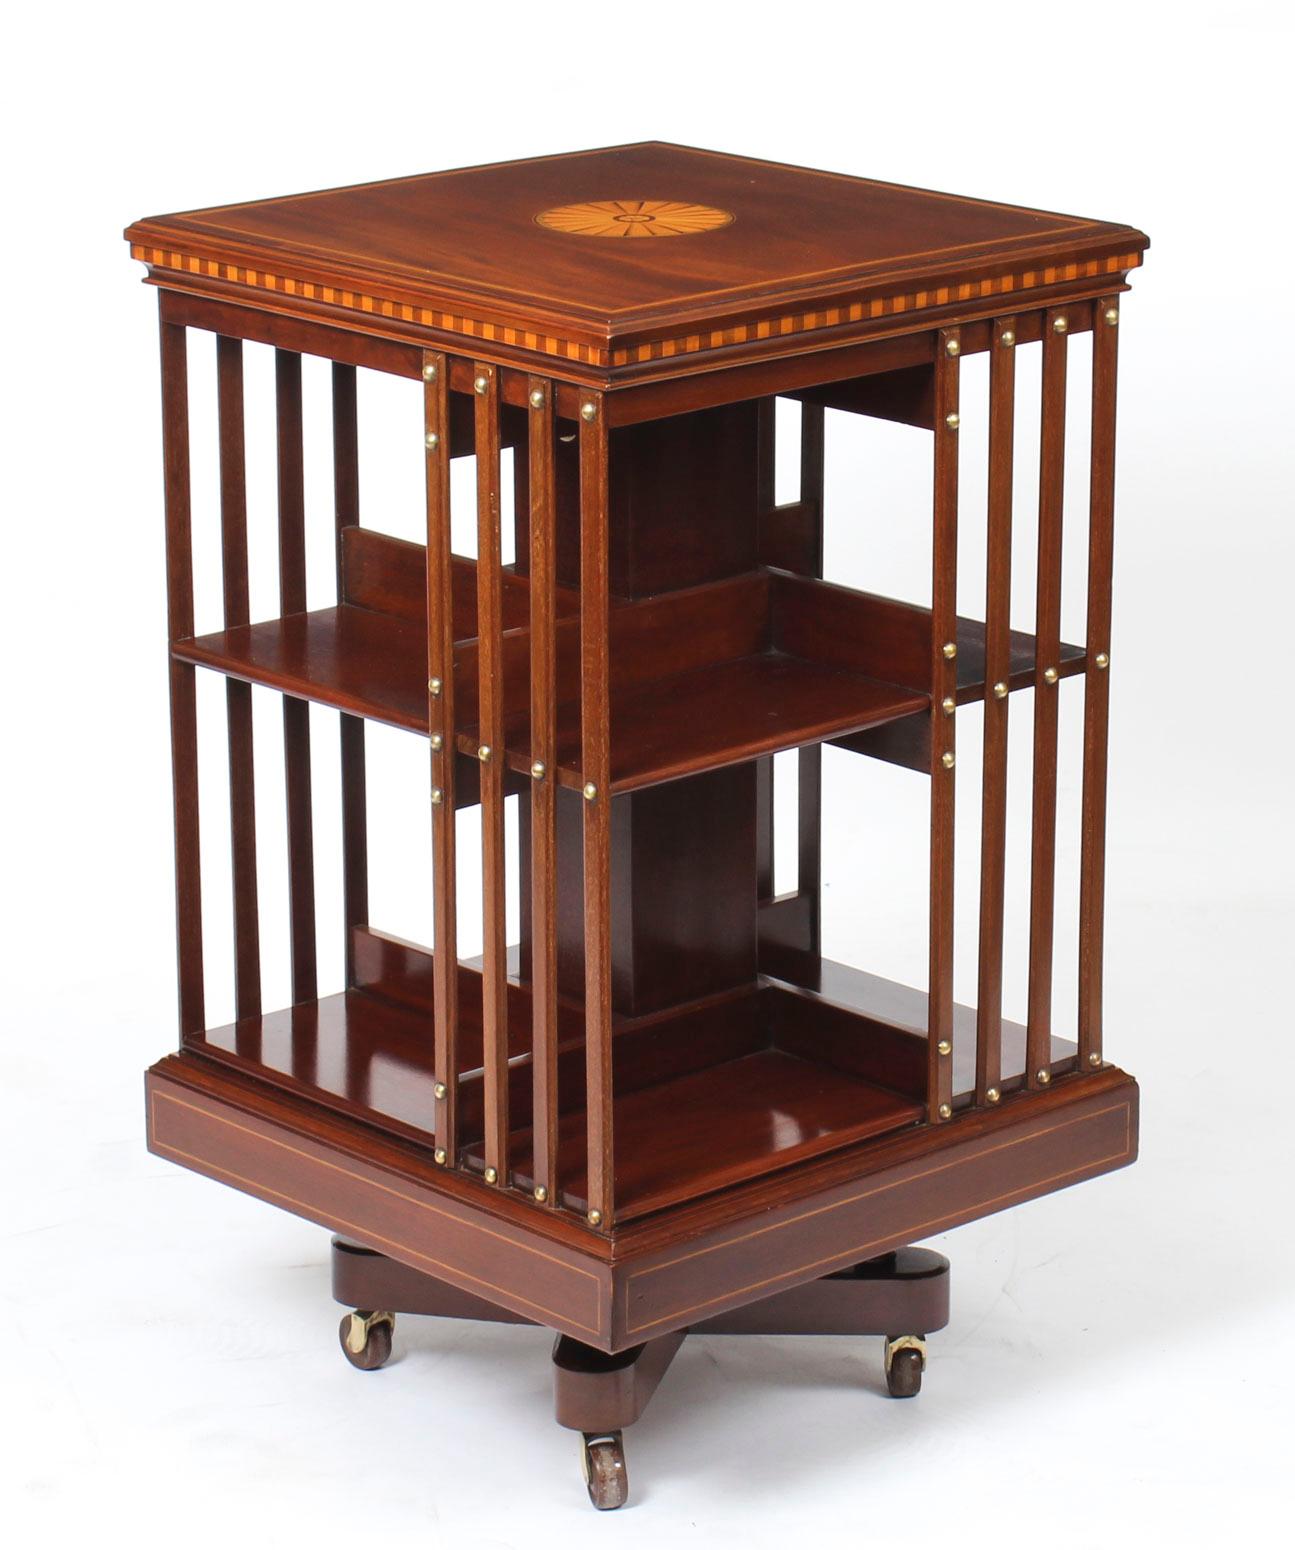 Early 20th Century Edwardian Revolving Bookcase by Maple & Co 6